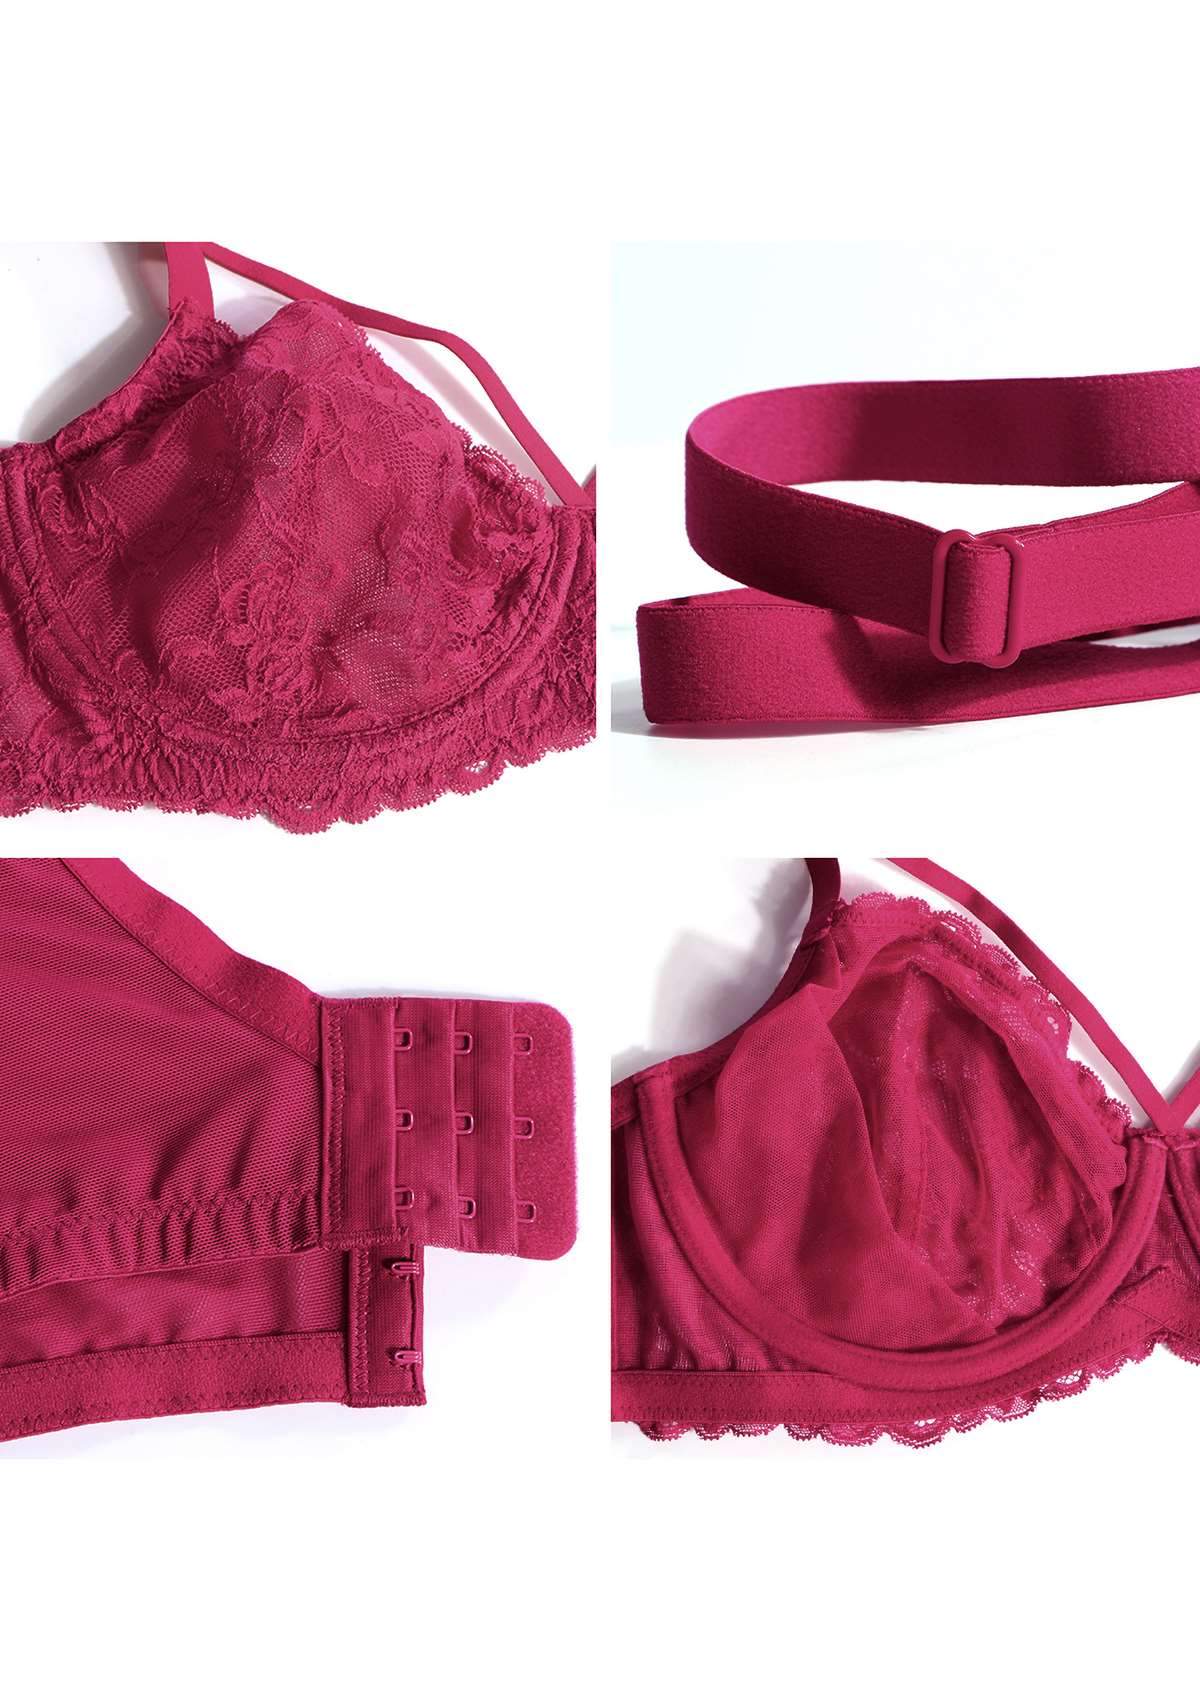 HSIA Pretty In Petals Sexy Lace Bra: Full Coverage Back Smoothing Bra - Red / 38 / DDD/F